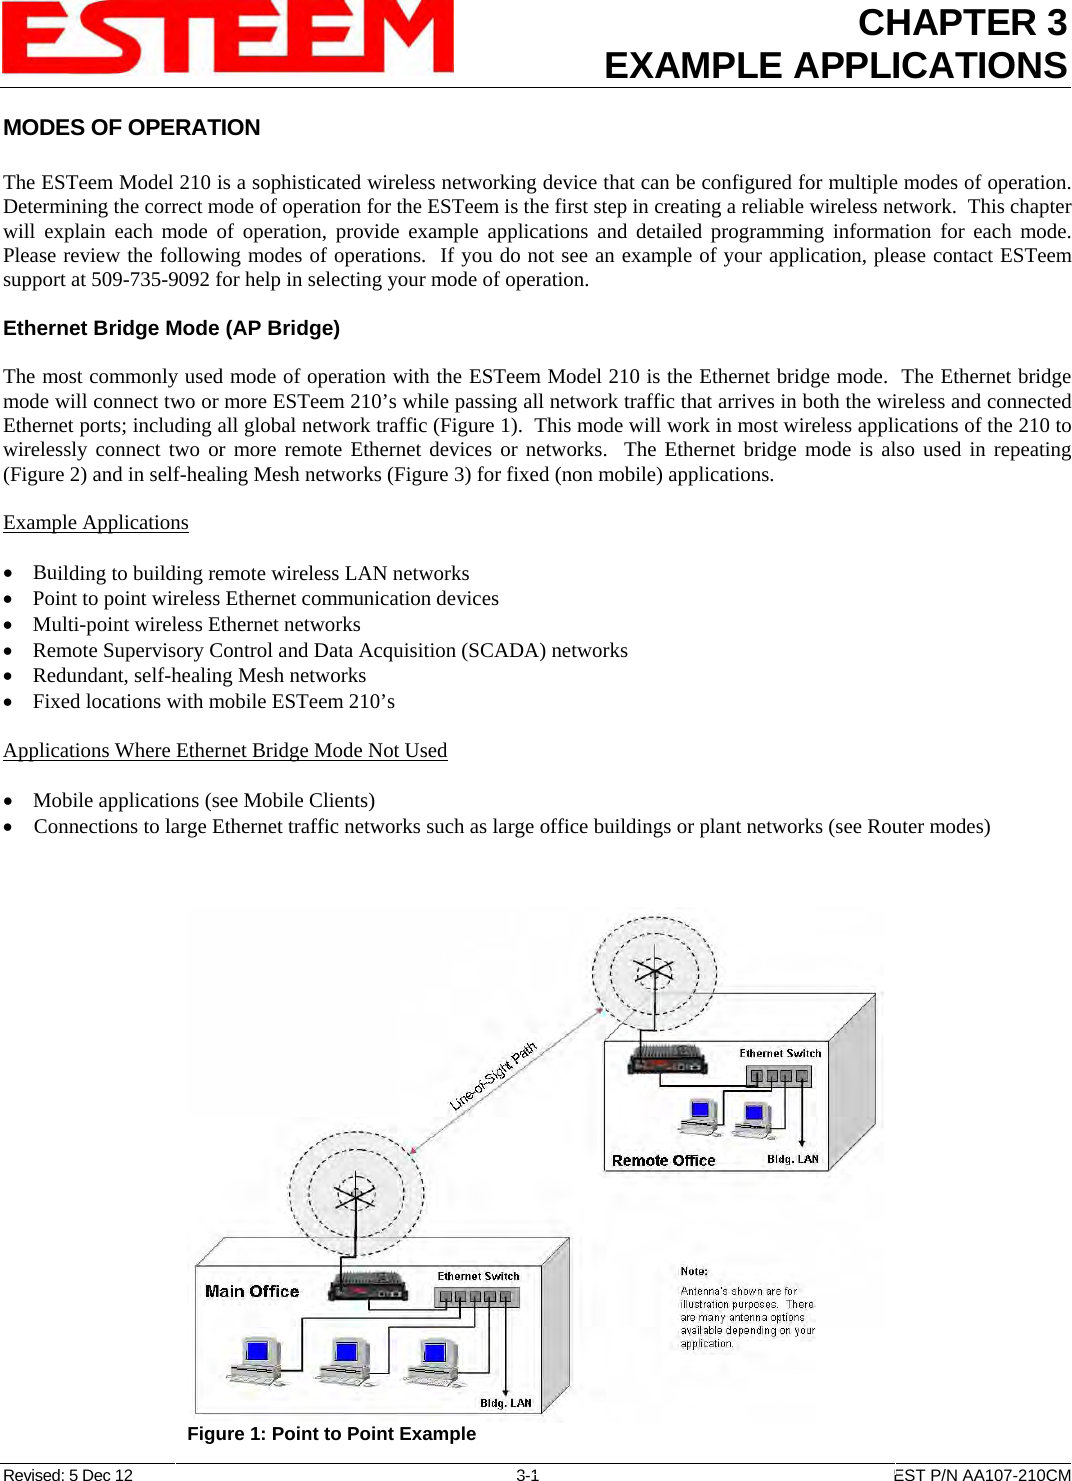 CHAPTER 3 EXAMPLE APPLICATIONS  MODES OF OPERATION  The ESTeem Model 210 is a sophisticated wireless networking device that can be configured for multiple modes of operation.  Determining the correct mode of operation for the ESTeem is the first step in creating a reliable wireless network.  This chapter will explain each mode of operation, provide example applications and detailed programming information for each mode.  Please review the following modes of operations.  If you do not see an example of your application, please contact ESTeem support at 509-735-9092 for help in selecting your mode of operation.  Ethernet Bridge Mode (AP Bridge)  The most commonly used mode of operation with the ESTeem Model 210 is the Ethernet bridge mode.  The Ethernet bridge mode will connect two or more ESTeem 210’s while passing all network traffic that arrives in both the wireless and connected Ethernet ports; including all global network traffic (Figure 1).  This mode will work in most wireless applications of the 210 to wirelessly connect two or more remote Ethernet devices or networks.  The Ethernet bridge mode is also used in repeating (Figure 2) and in self-healing Mesh networks (Figure 3) for fixed (non mobile) applications.  Example Applications  • Building to building remote wireless LAN networks • Point to point wireless Ethernet communication devices • Multi-point wireless Ethernet networks • Remote Supervisory Control and Data Acquisition (SCADA) networks • Redundant, self-healing Mesh networks • Fixed locations with mobile ESTeem 210’s  Applications Where Ethernet Bridge Mode Not Used  • Mobile applications (see Mobile Clients) • Connections to large Ethernet traffic networks such as large office buildings or plant networks (see Router modes)  Revised: 5 Dec 12  3-1  EST P/N AA107-210CM  Figure 1: Point to Point Example  